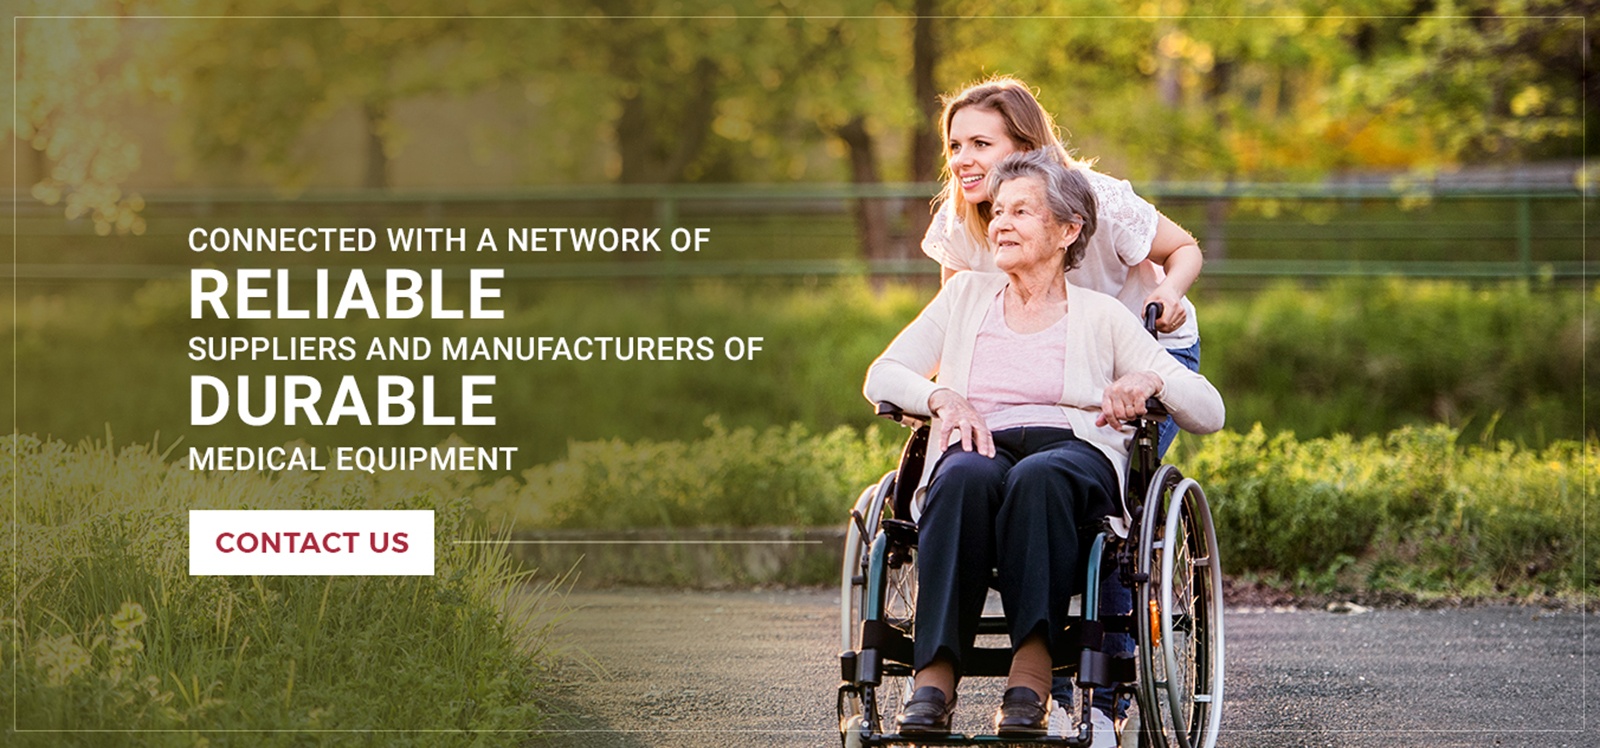 Connected with a Network of Reliable Suppliers and Manufacturers of Durable  Medical Equipment